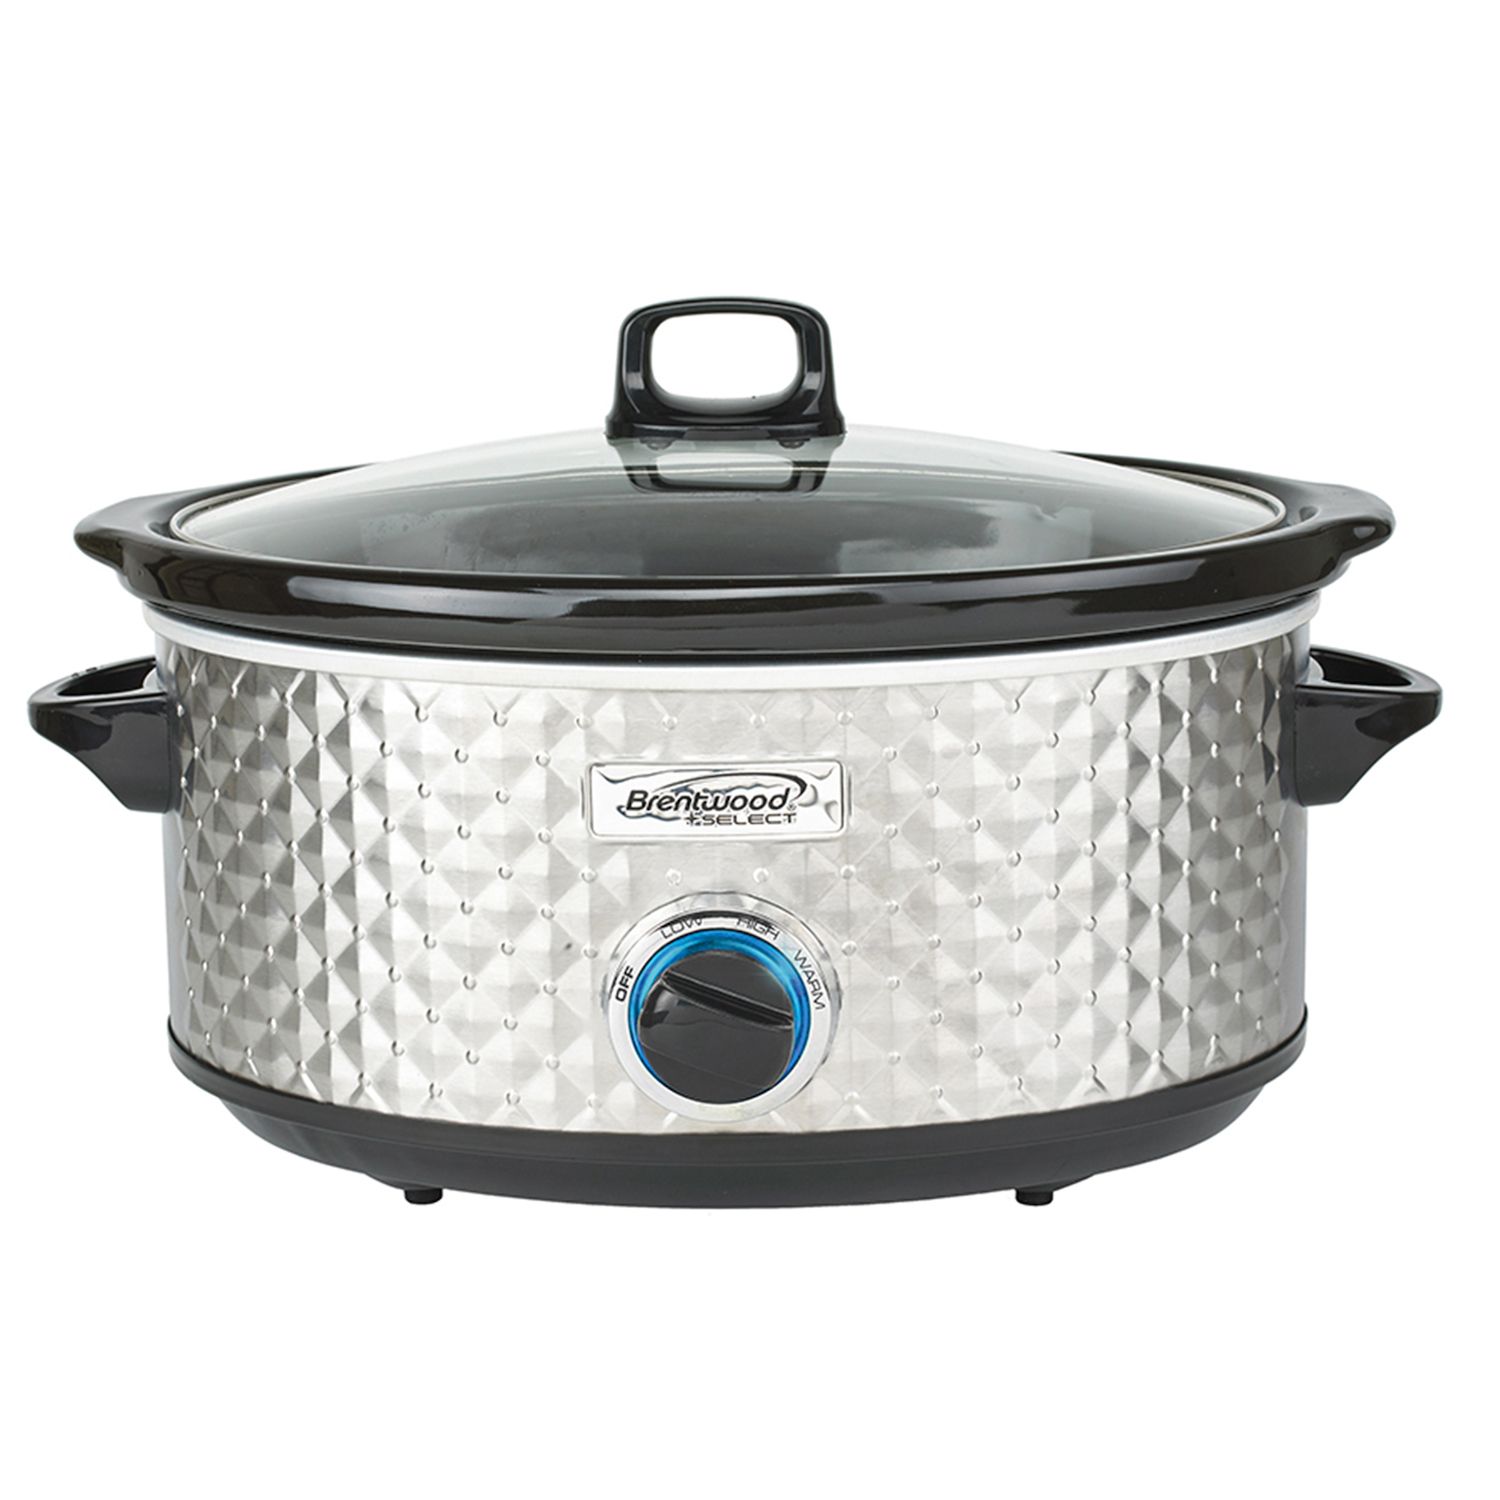 Brentwood Appliances Scallop 4.5 qt. Blue Slow Cooker with